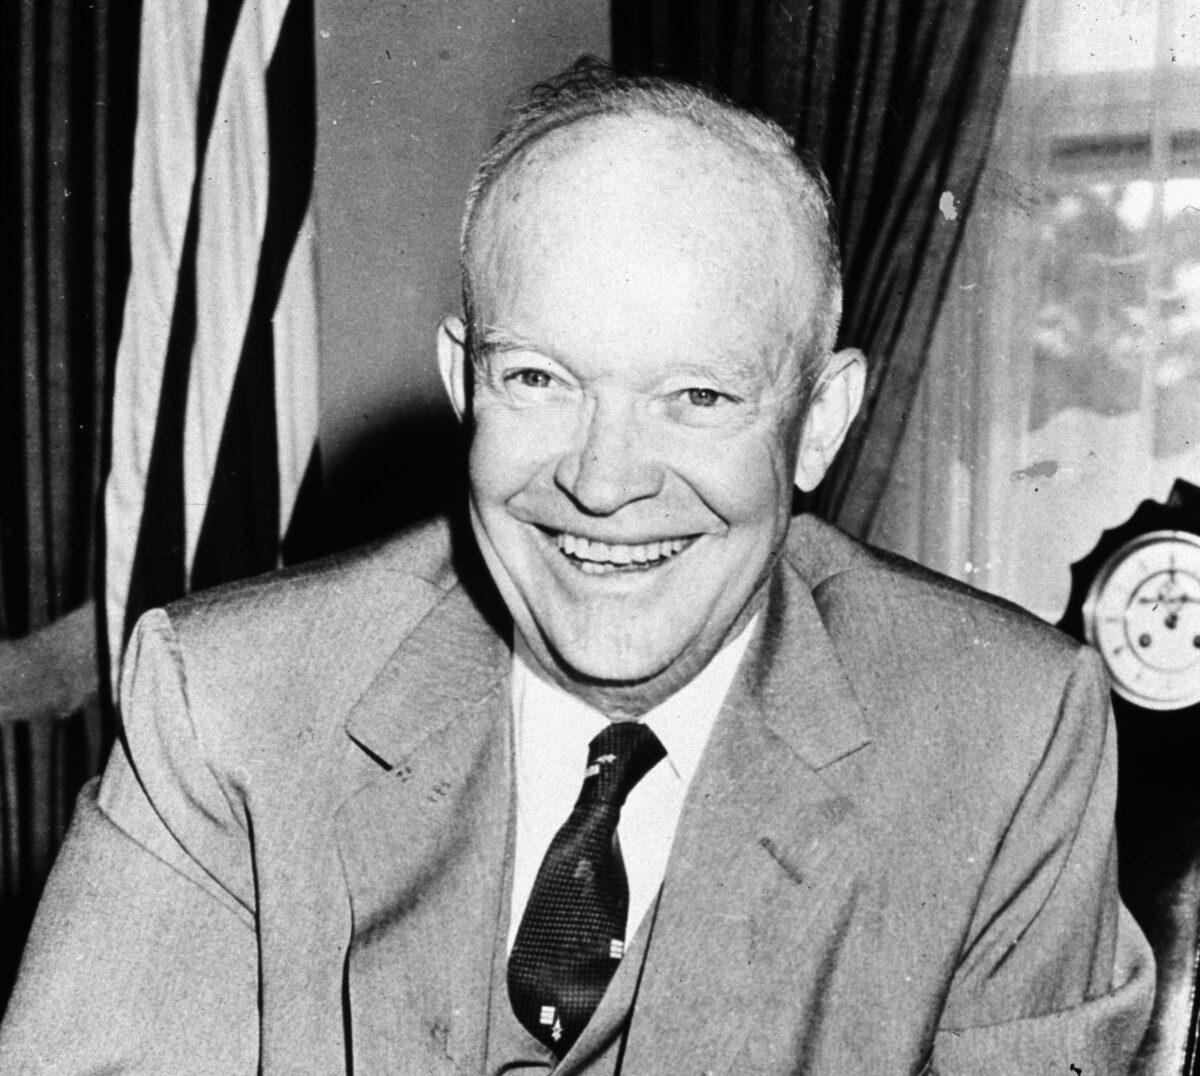 circa 1955: Dwight David Eisenhower (1890 - 1969), the American military leader whose triumph as Allied Supreme Commander during World War II led to his becoming the 34th President of the United States. (MPI/Getty Images)